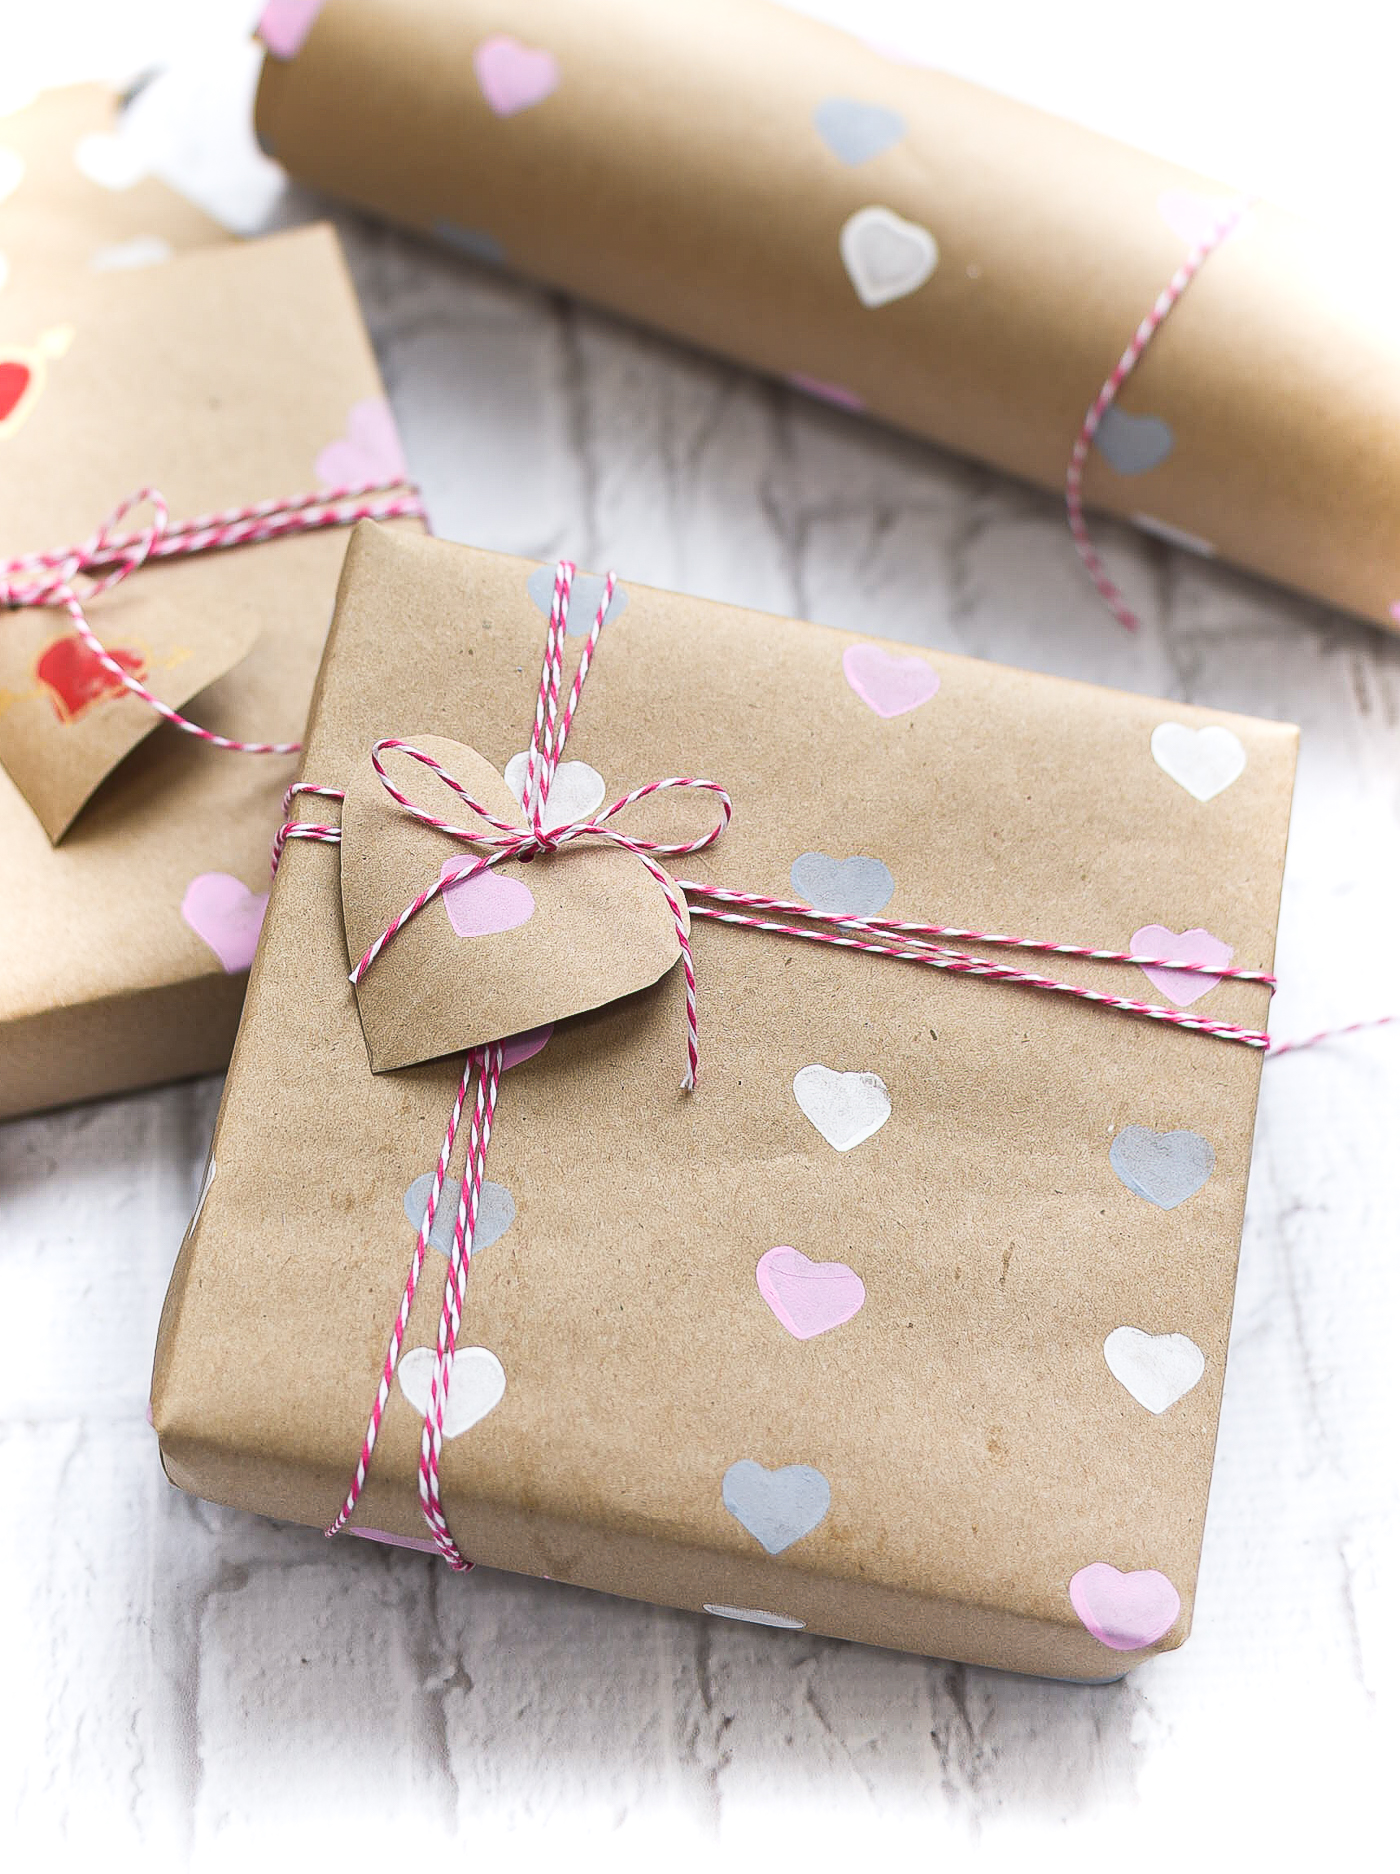 Present Gift Wrapping Paper Sheets Set of 6,Valentine's Day Heart